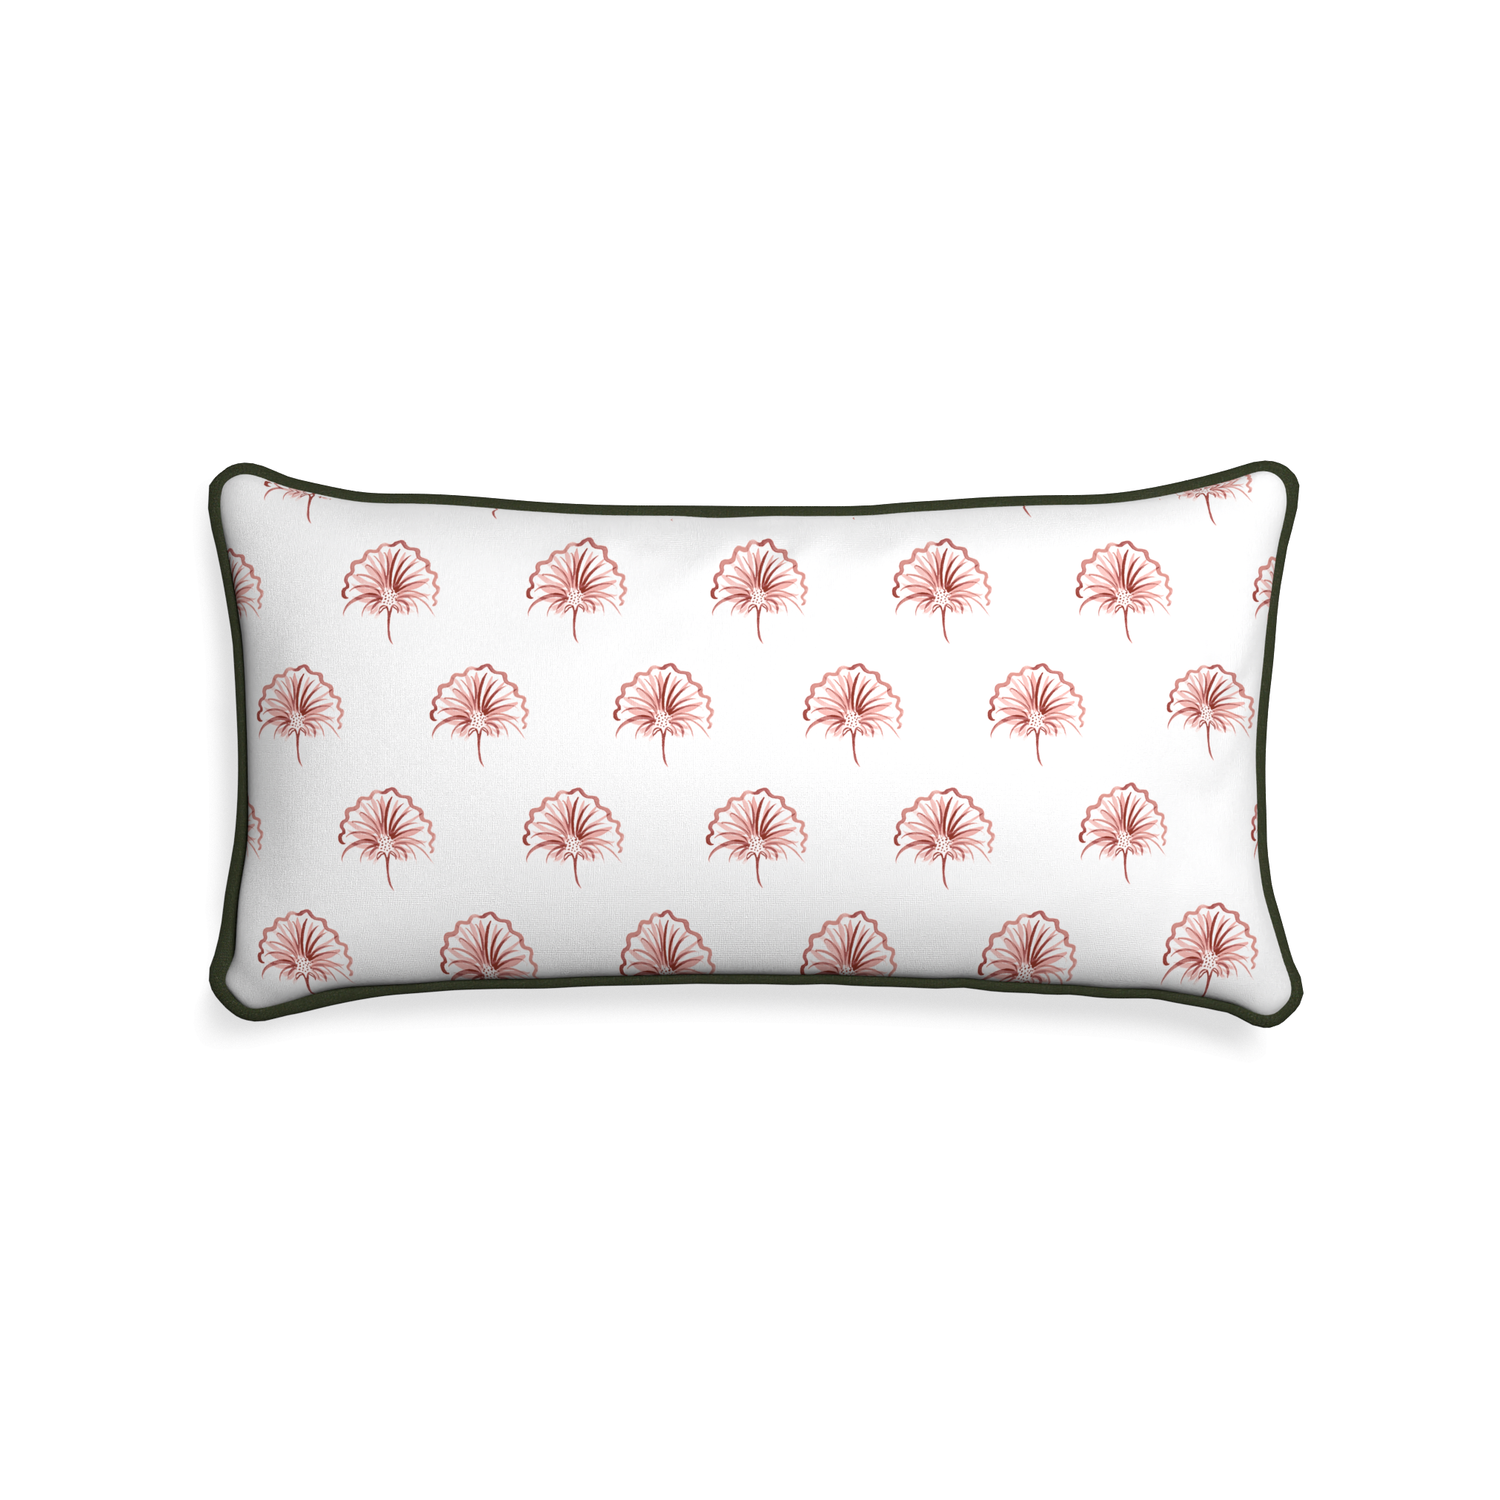 Midi-lumbar penelope rose custom floral pinkpillow with f piping on white background